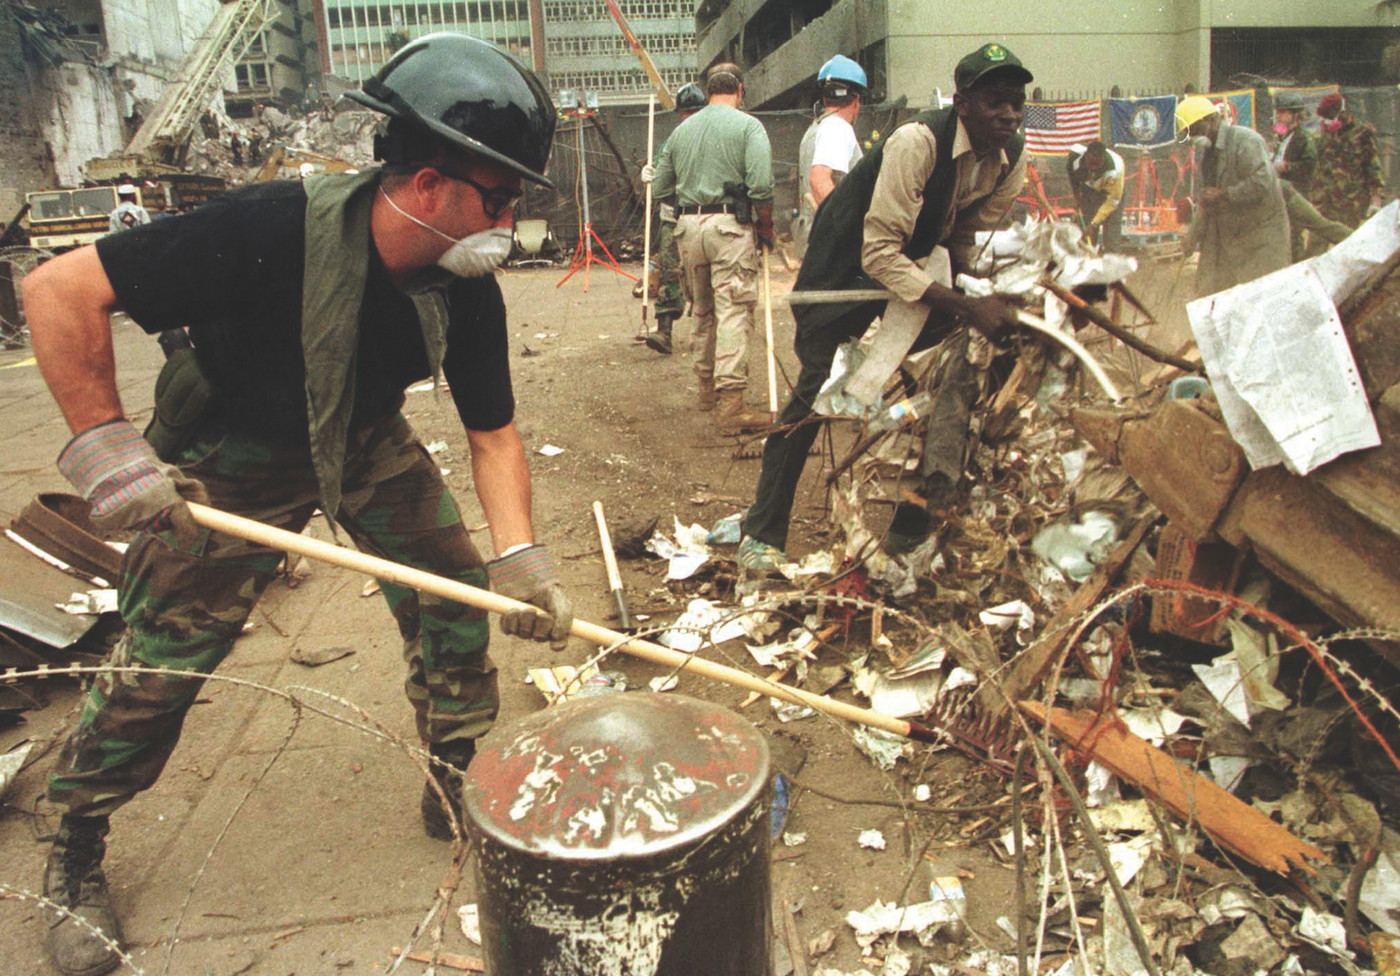 An FBI agent rakes through debris looking for clues following the car bombing of the U.S. Embassy in Kenya in August 1998. Reuters.